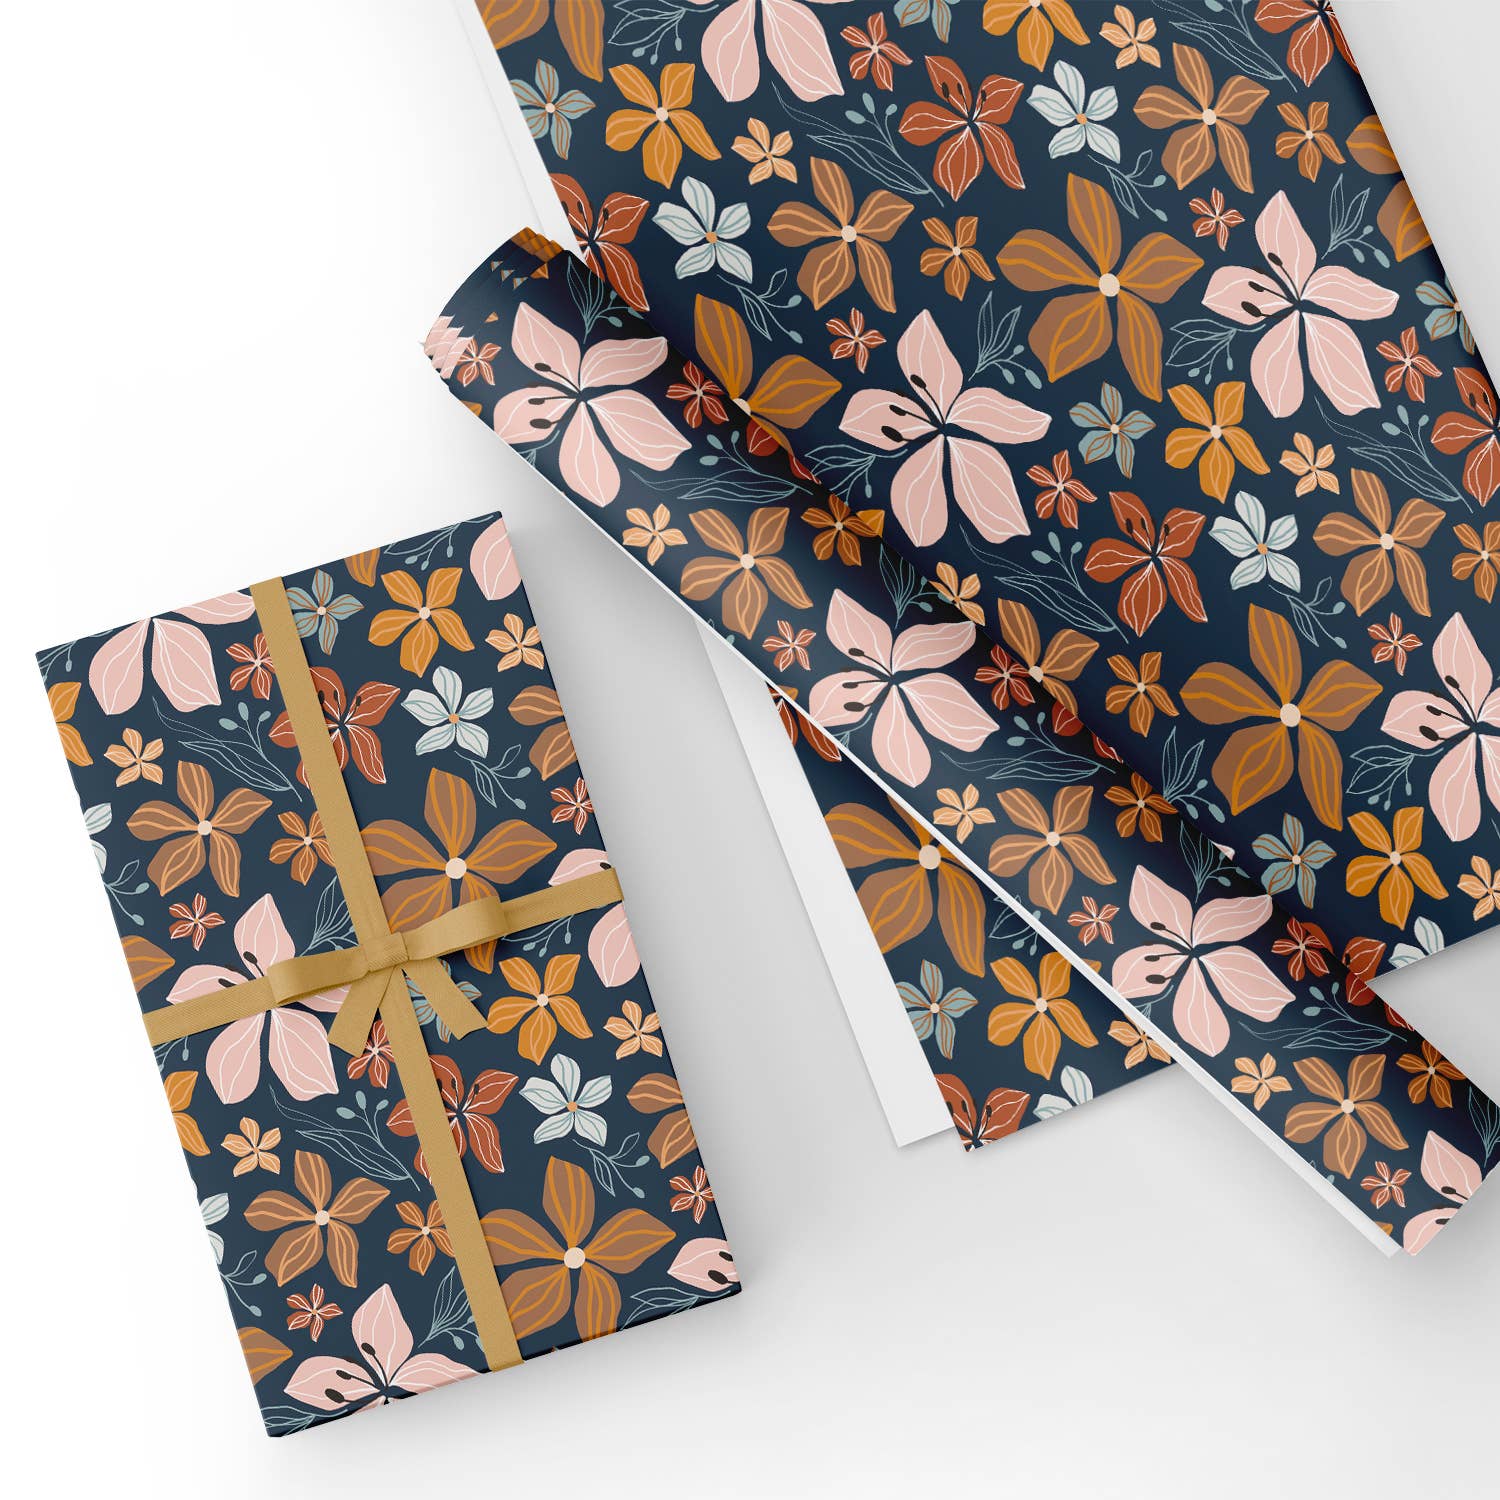 Autumn Floral Flat Wrapping Paper Sheet Wholesale Wraphaholic